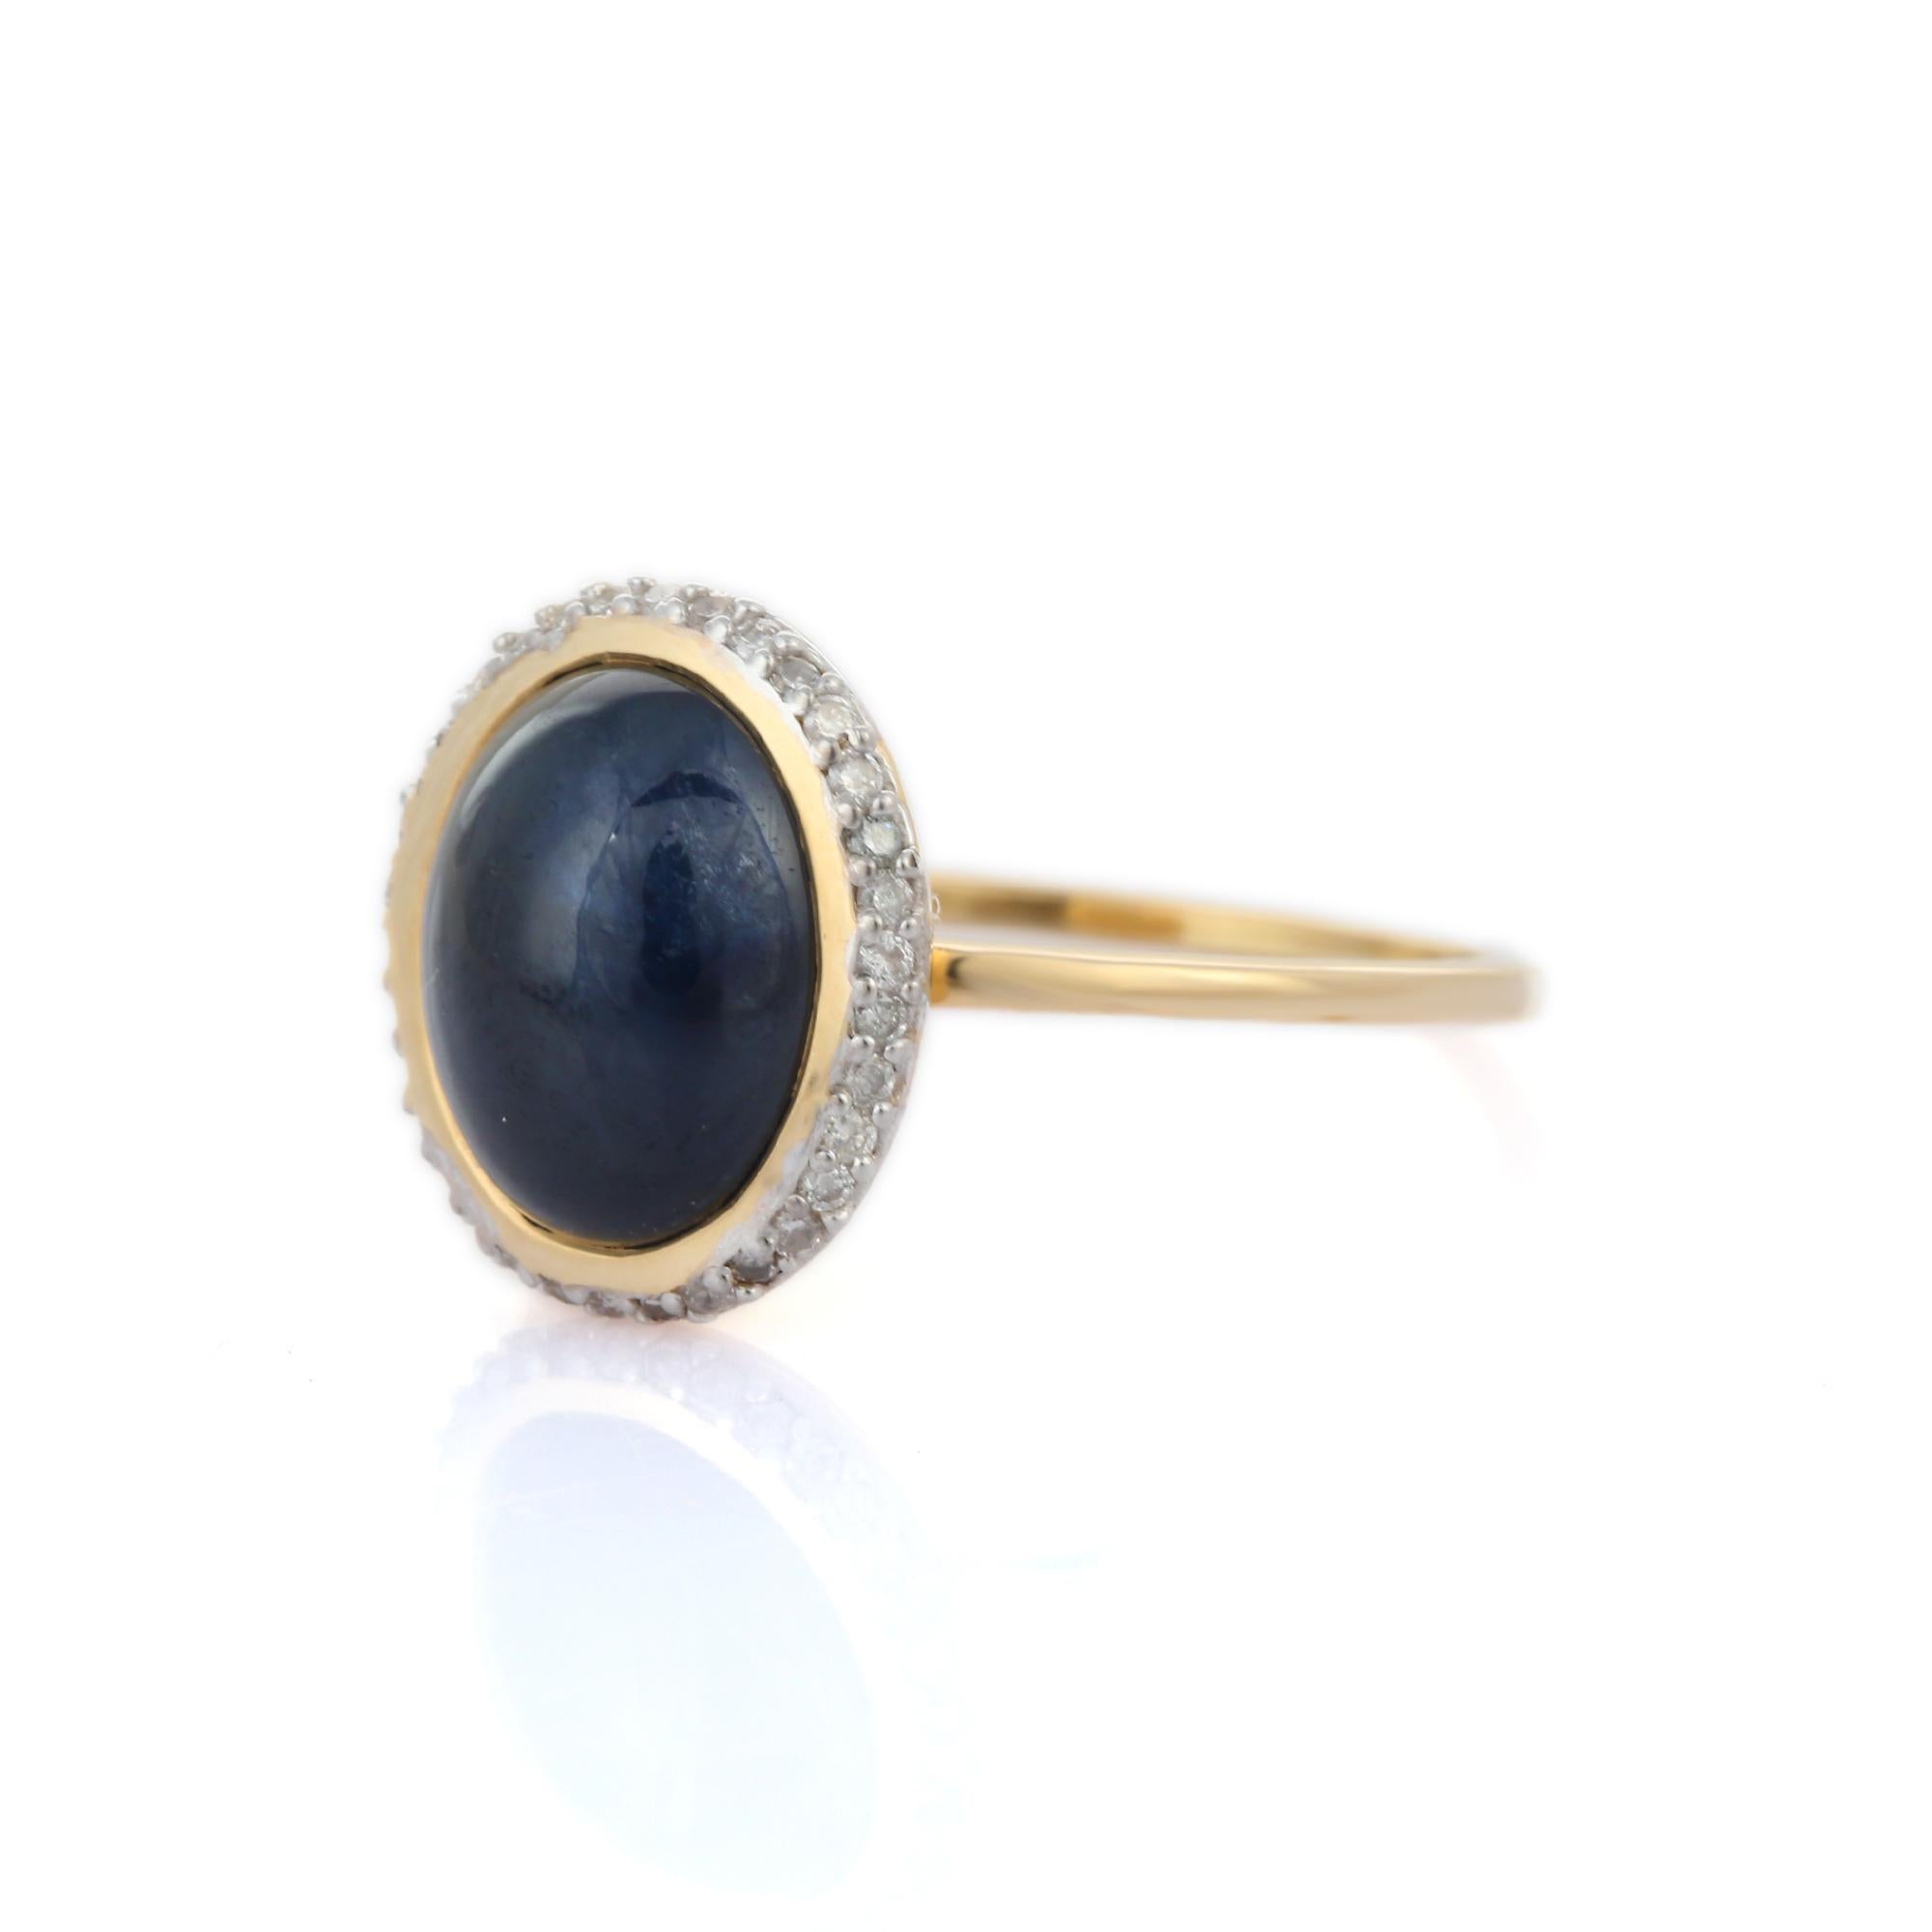 For Sale:  Splendid 4.94 ct Sapphire Diamond Statement Cocktail Ring in 14K Yellow Gold 4